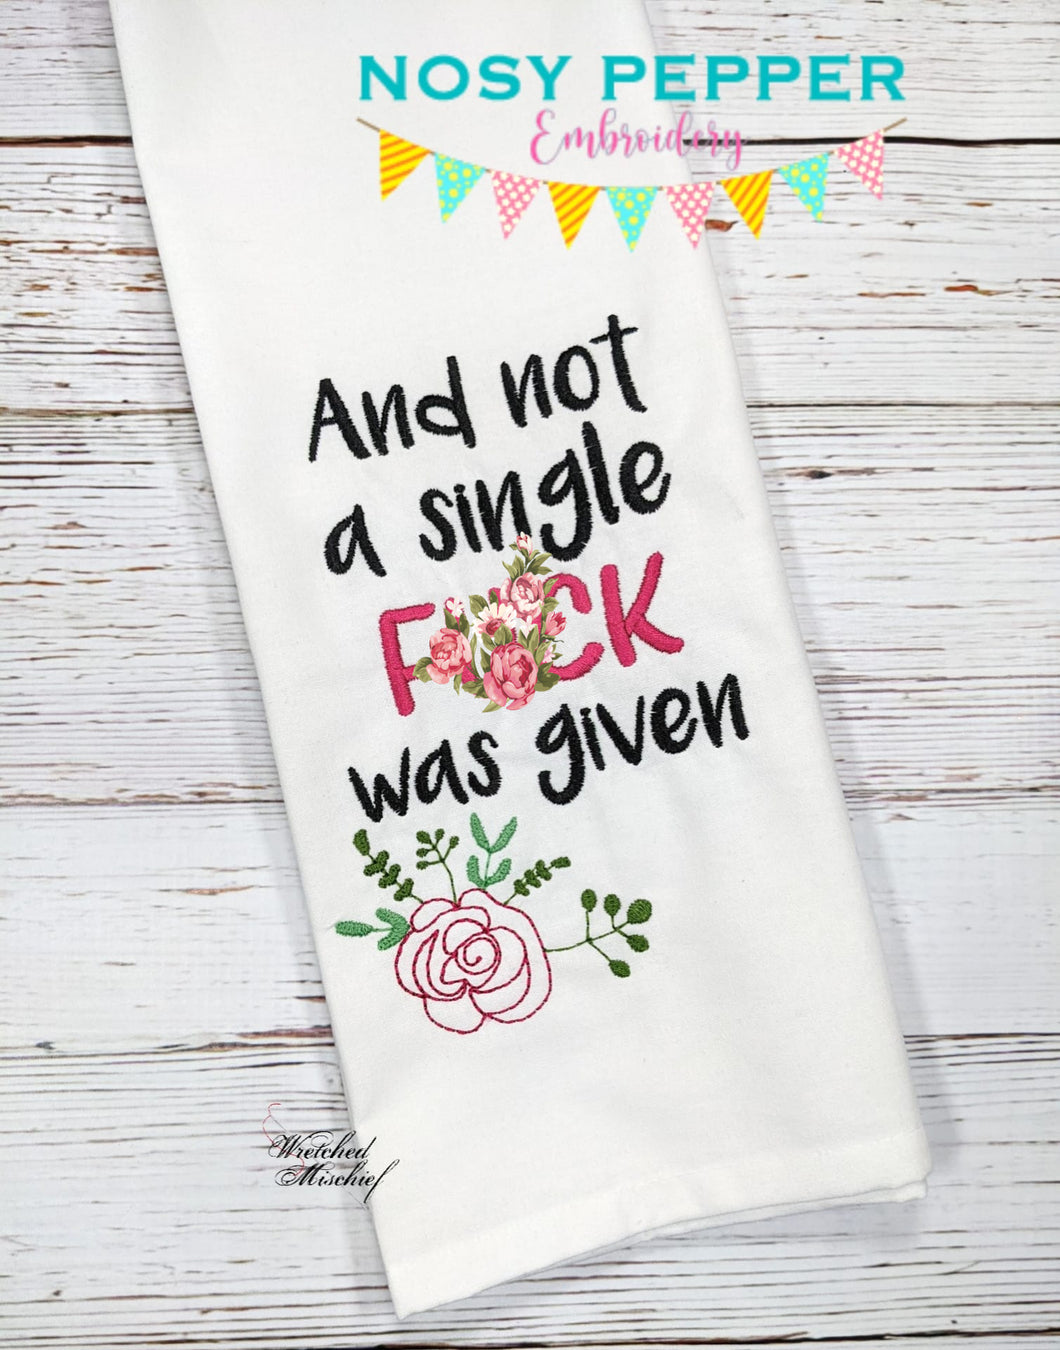 And not a single f*ck was given machine embroidery design (4 sizes included) DIGITAL DOWNLOAD